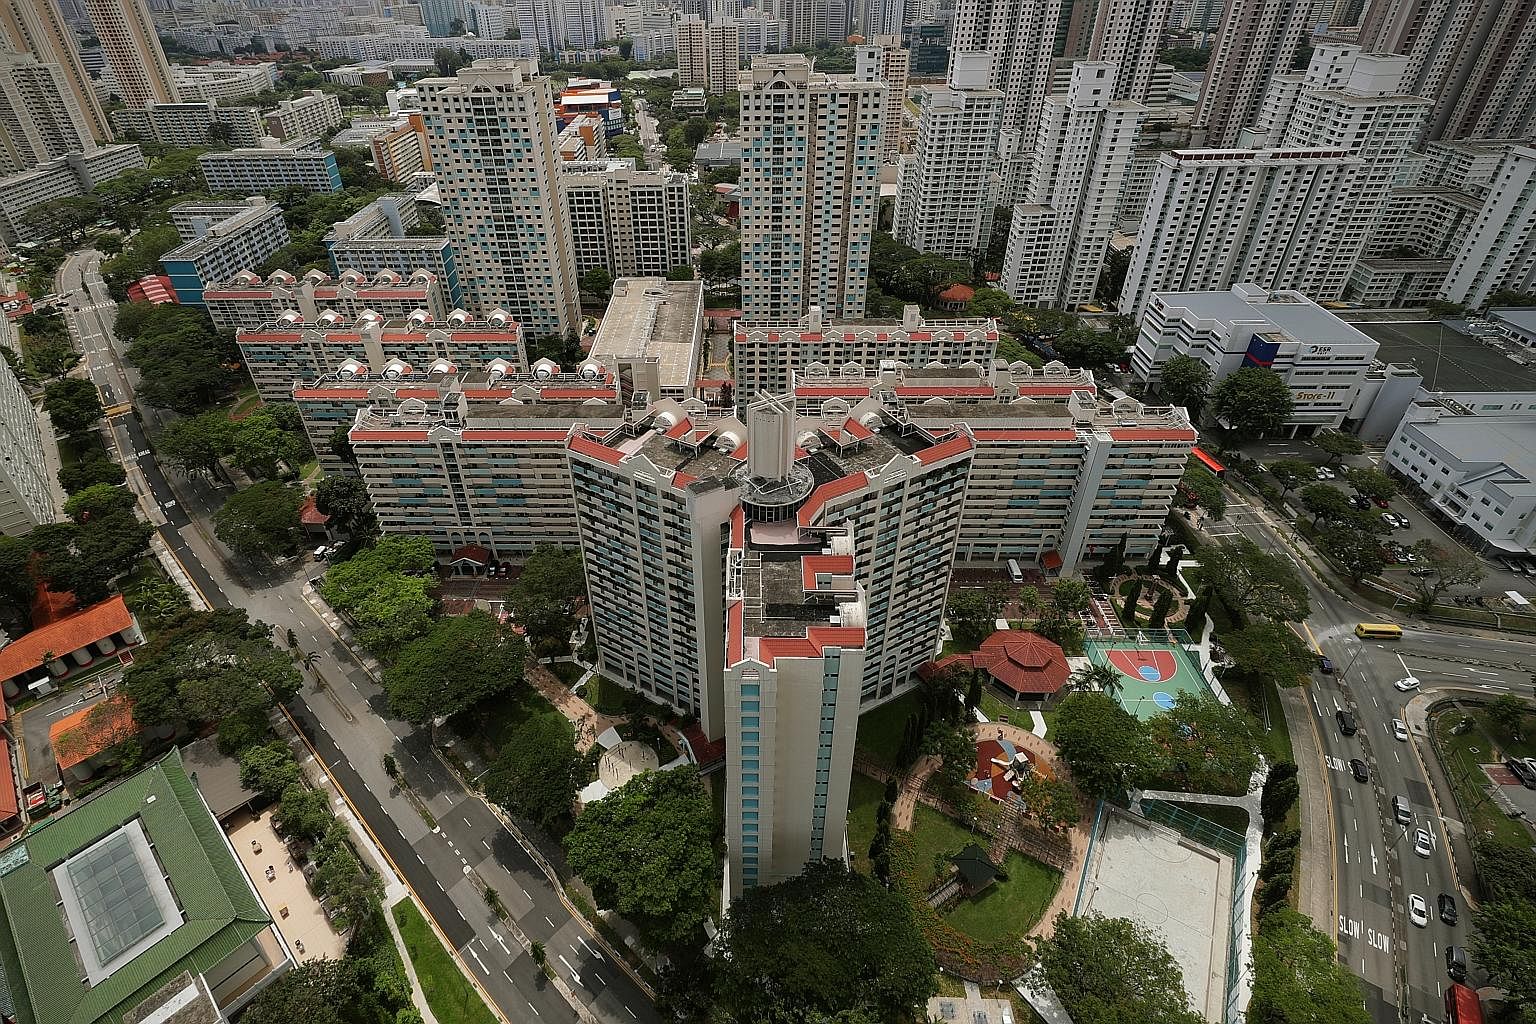 1963: When Selegie House was completed, it was the tallest mixed-development building in Singapore comprising both residential units and commercial shops. 1968: The unique Y-shaped Block 53 Toa Payoh Lorong 5, as seen from Gem Residences. The block w